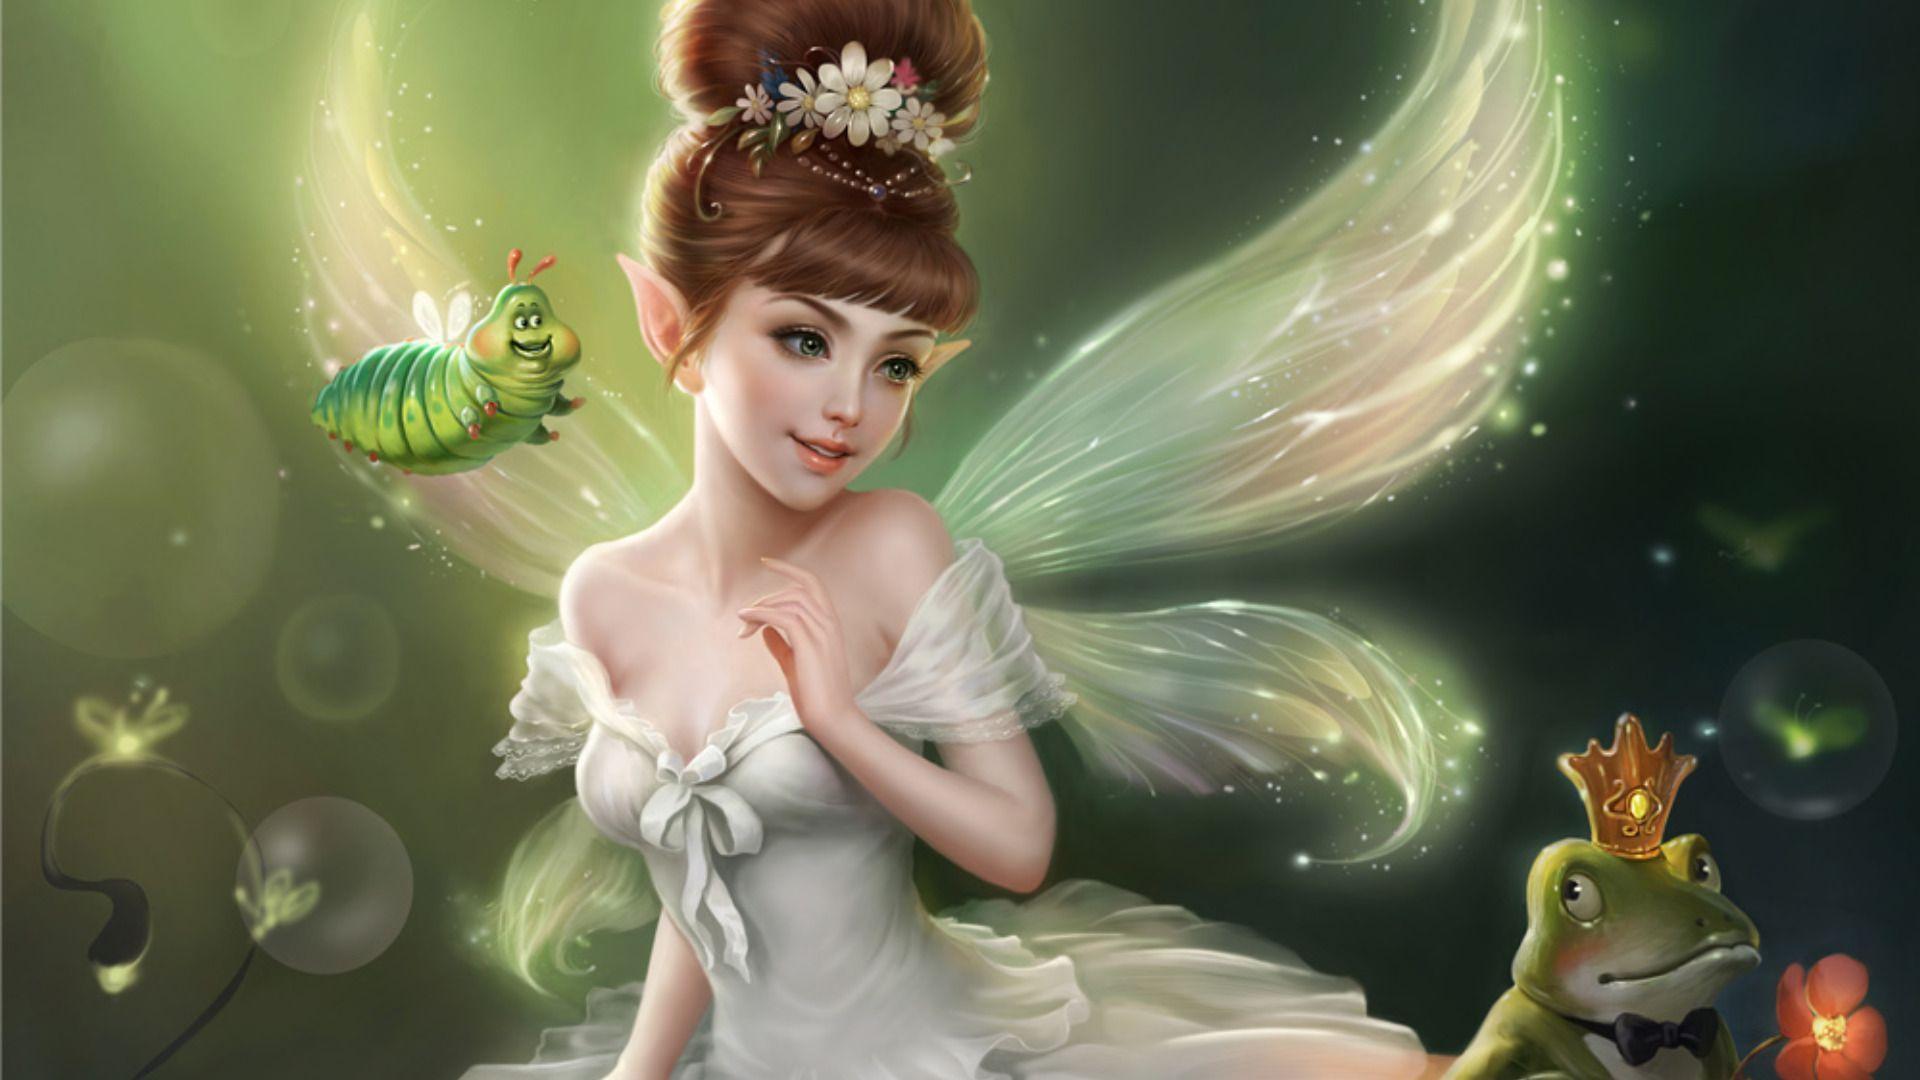 Angels and Fairies Wallpaper Free Angels and Fairies